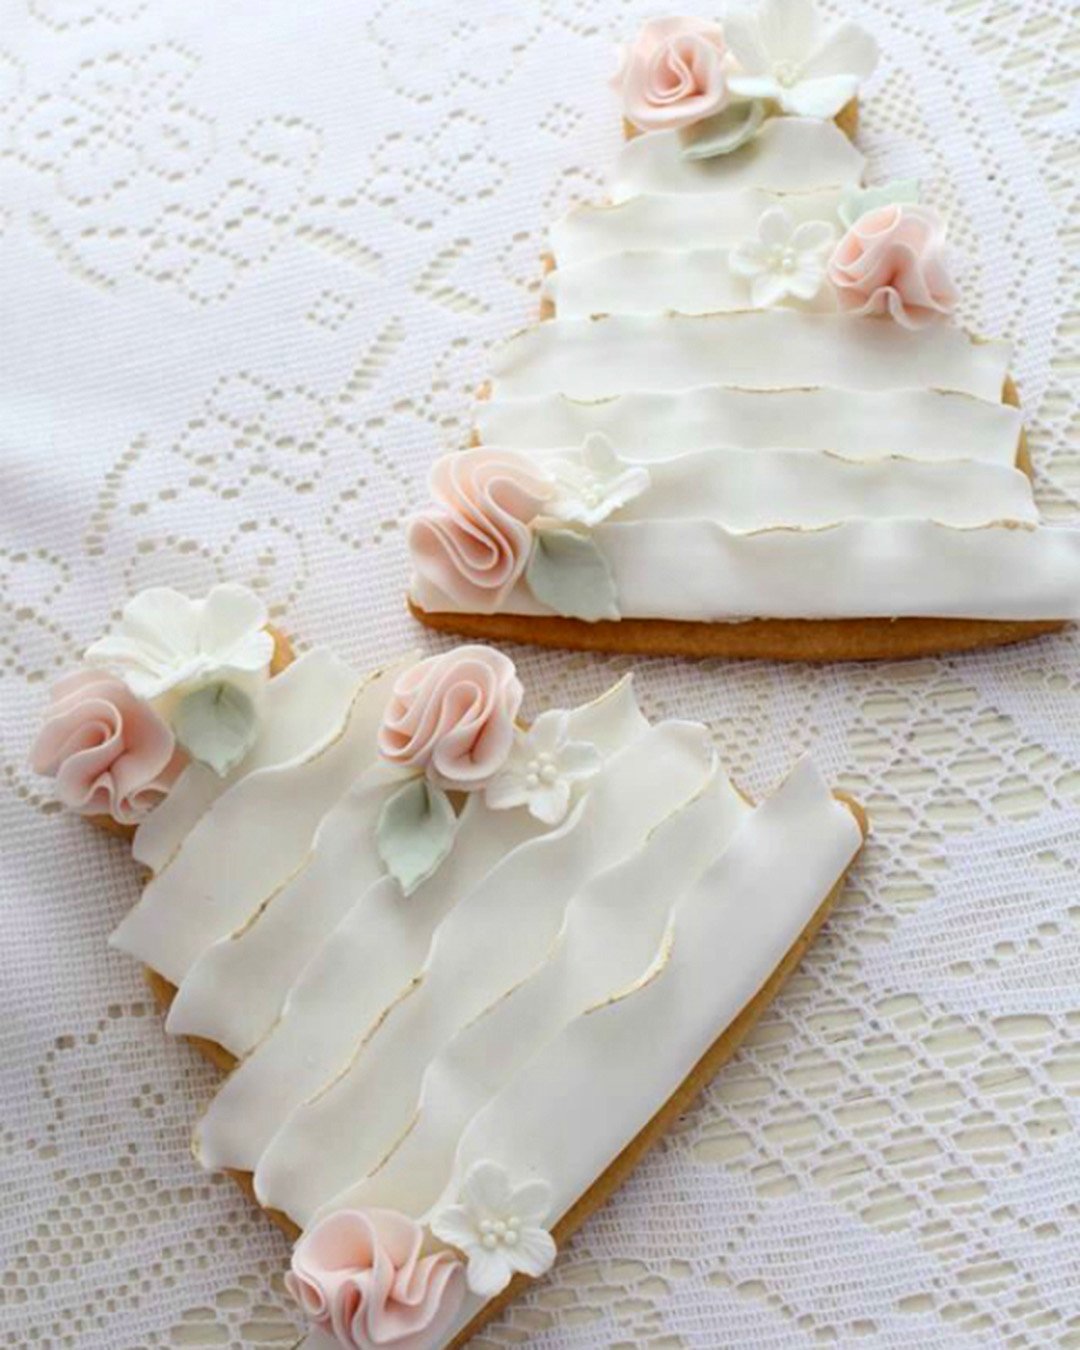 wedding cake cookies gentlewhite with ruffles and roses cakes2kreate